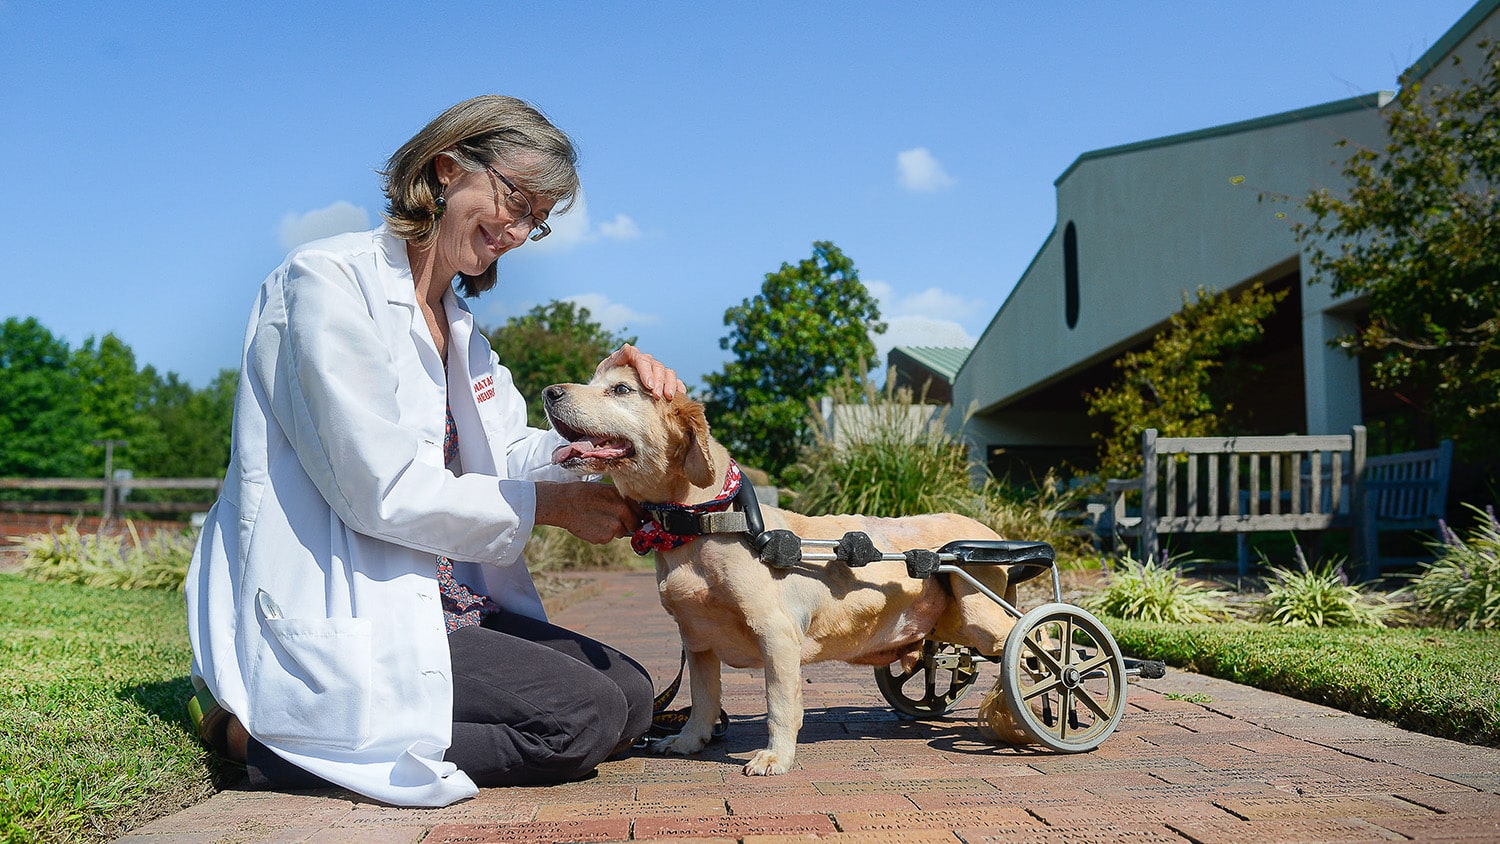 Natasha Olby pets a dog that is wearing a device with wheels to help it walk.